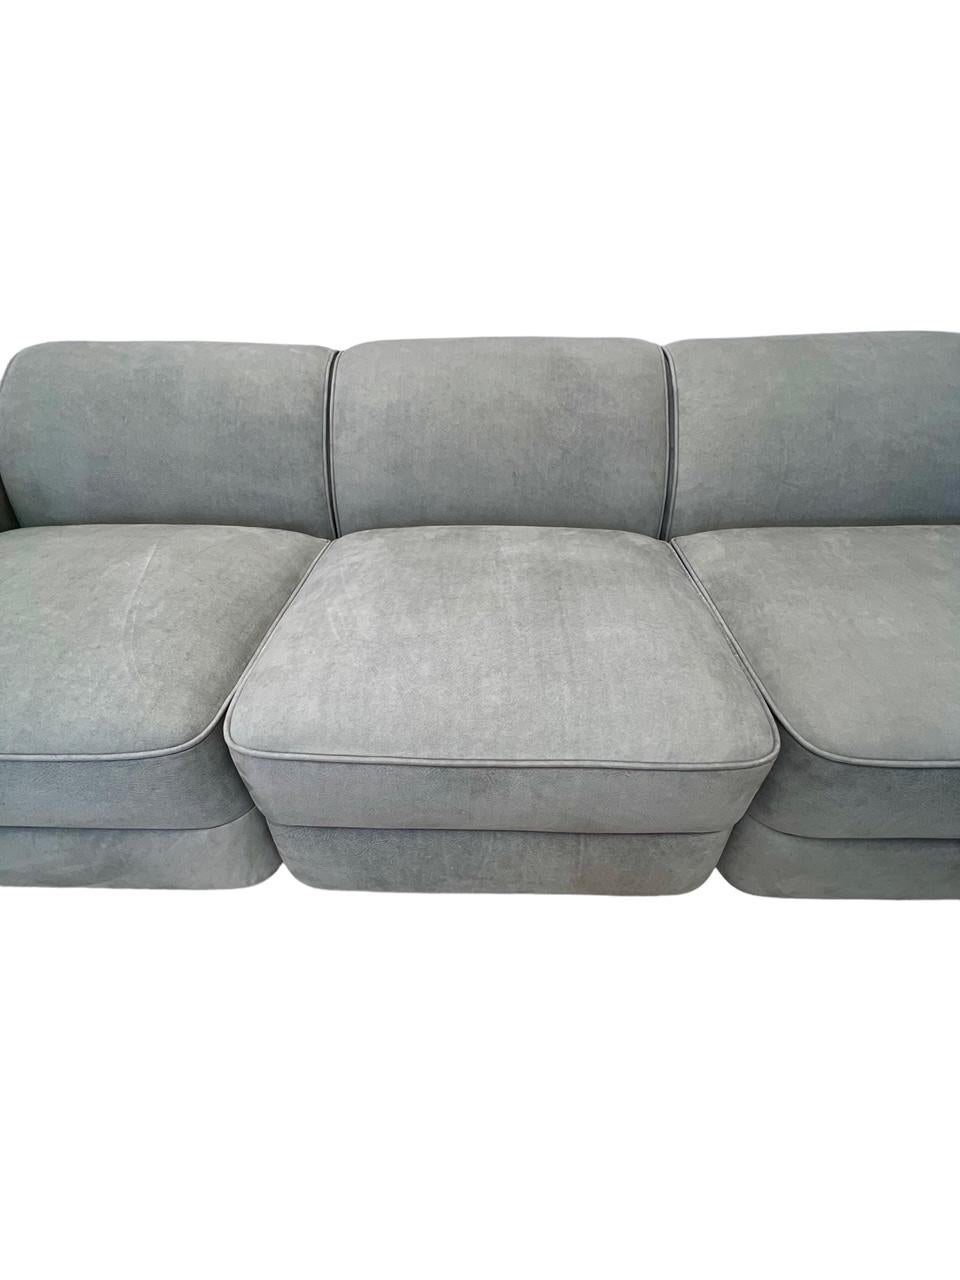 LC2 Style Inspired Sofa in Distressed Suede Leather In Excellent Condition For Sale In Saint Louis, US